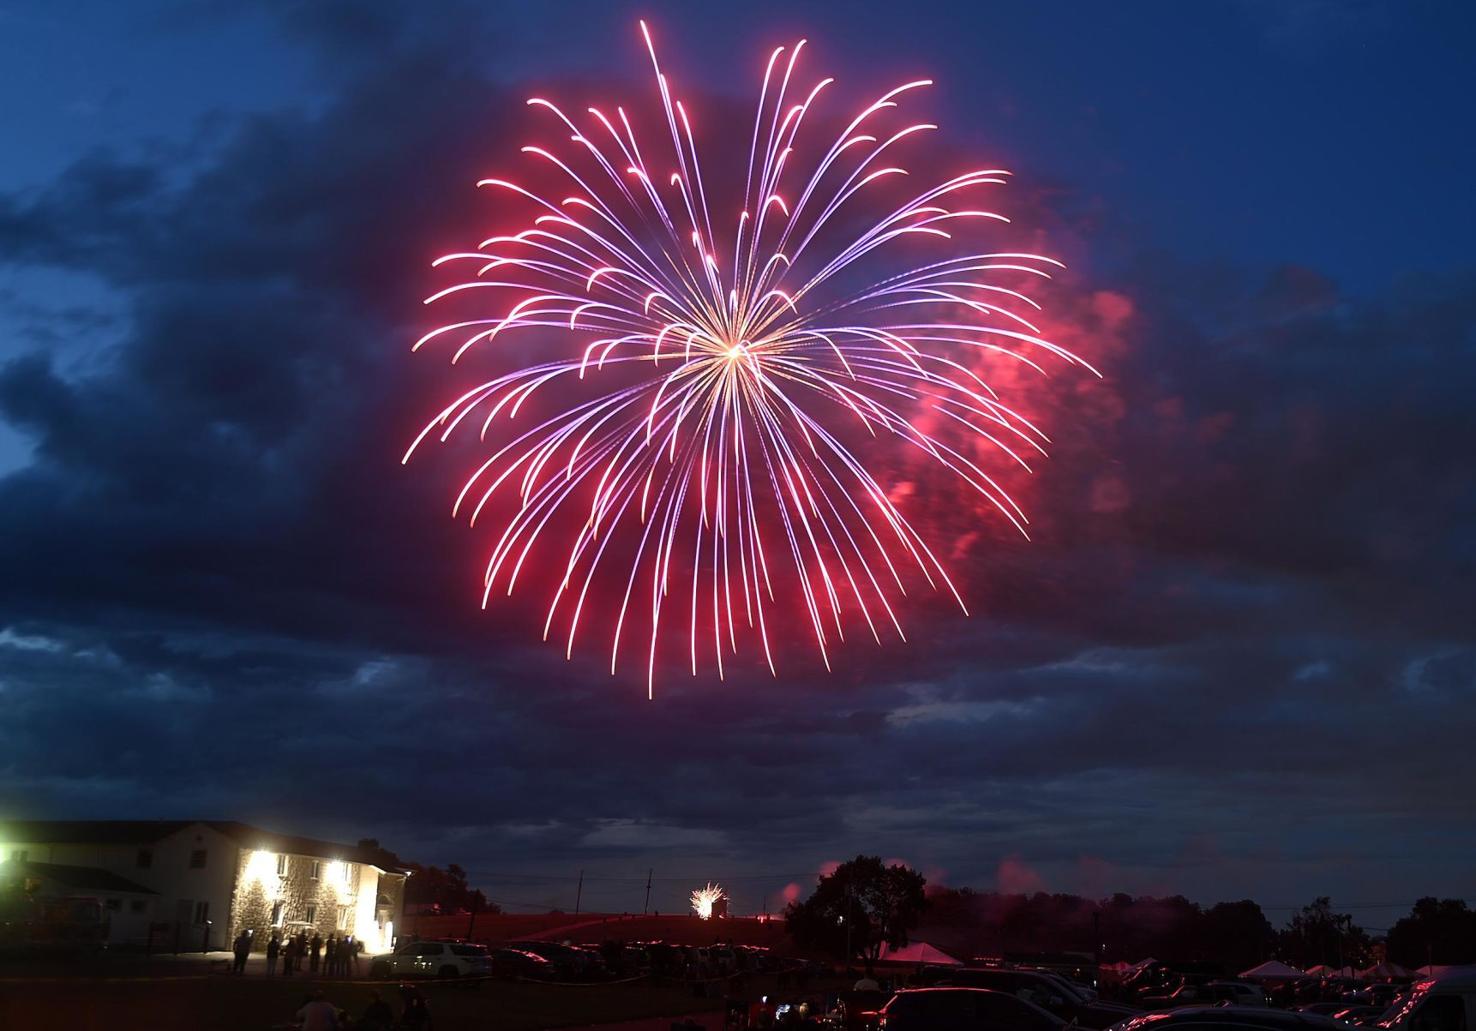 Carlisle to light up independence weekend with annual fireworks display